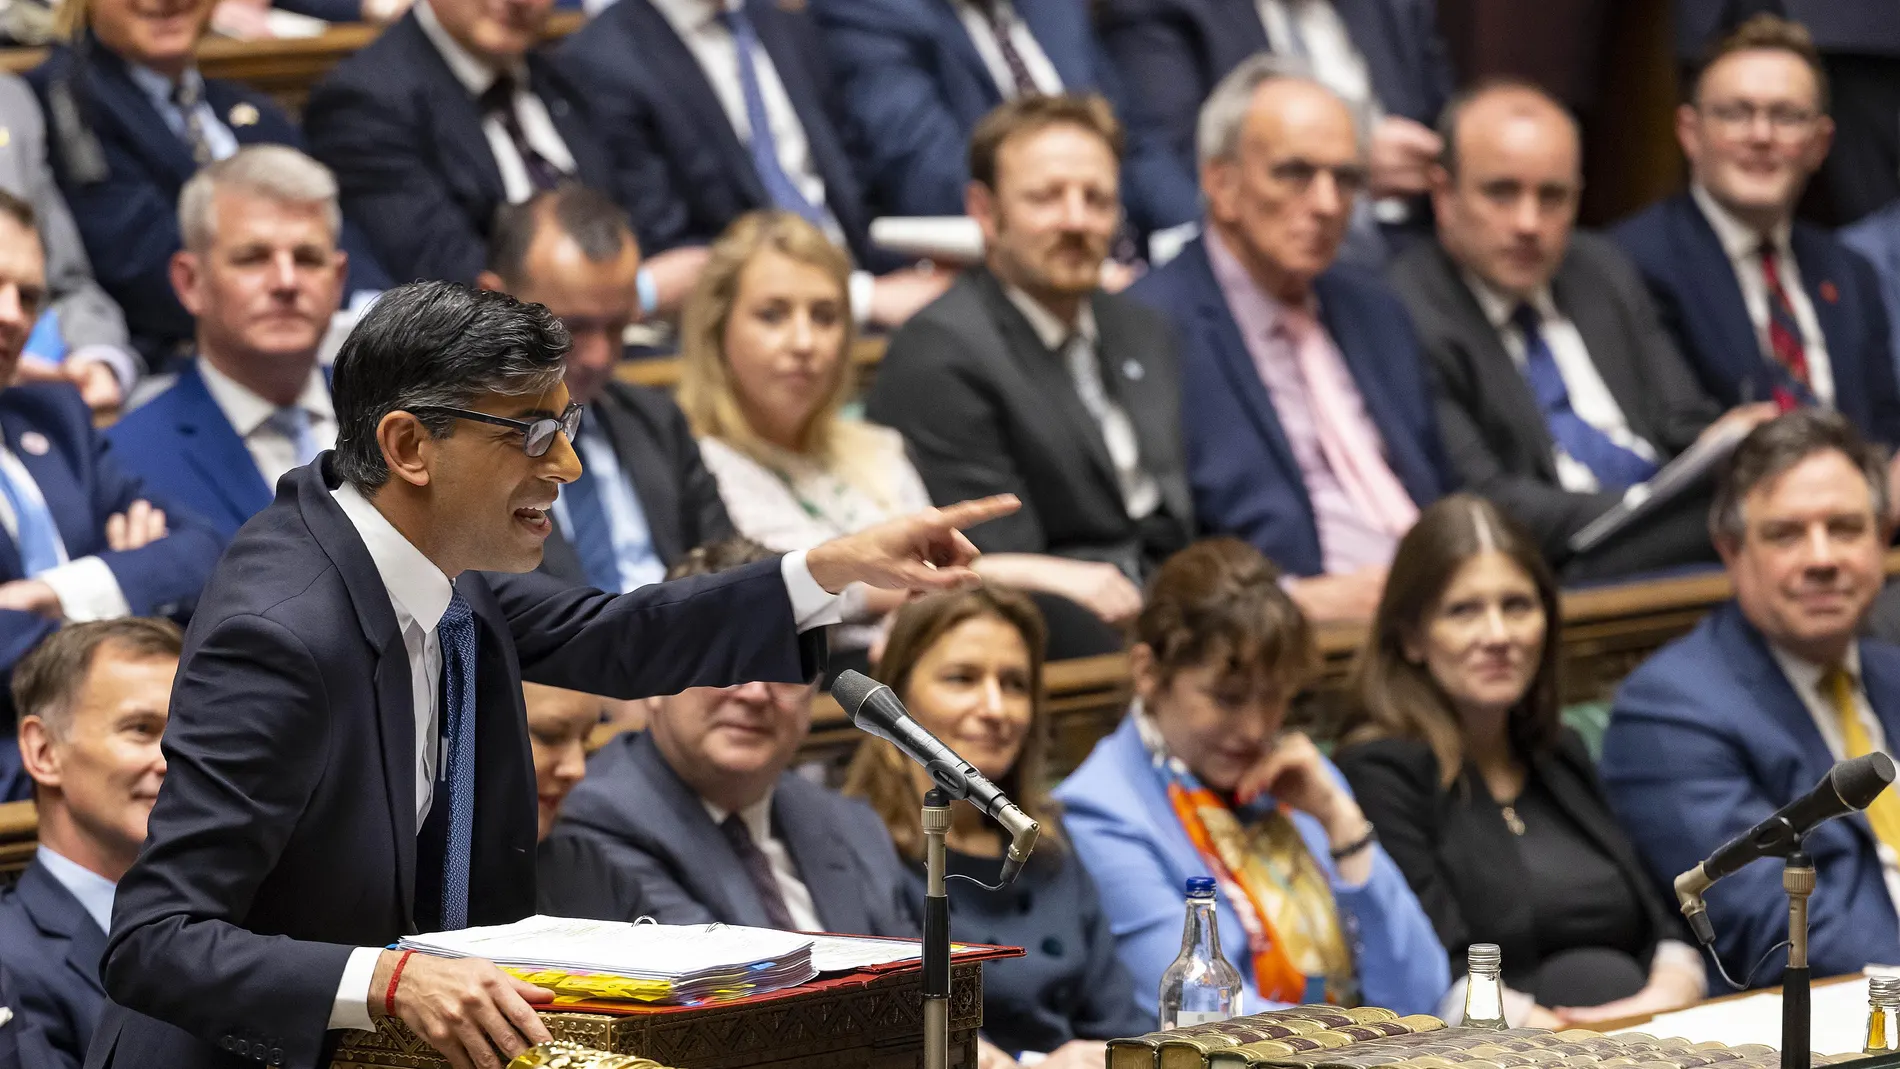 A handout photograph released by the UK Parliament shows Britain's Prime Minister Rishi Sunak standing at the despatch box and speaking during the weekly session of Prime Minister's Questions (PMQs) at the House of Commons, in London, on March 22, 2023. 